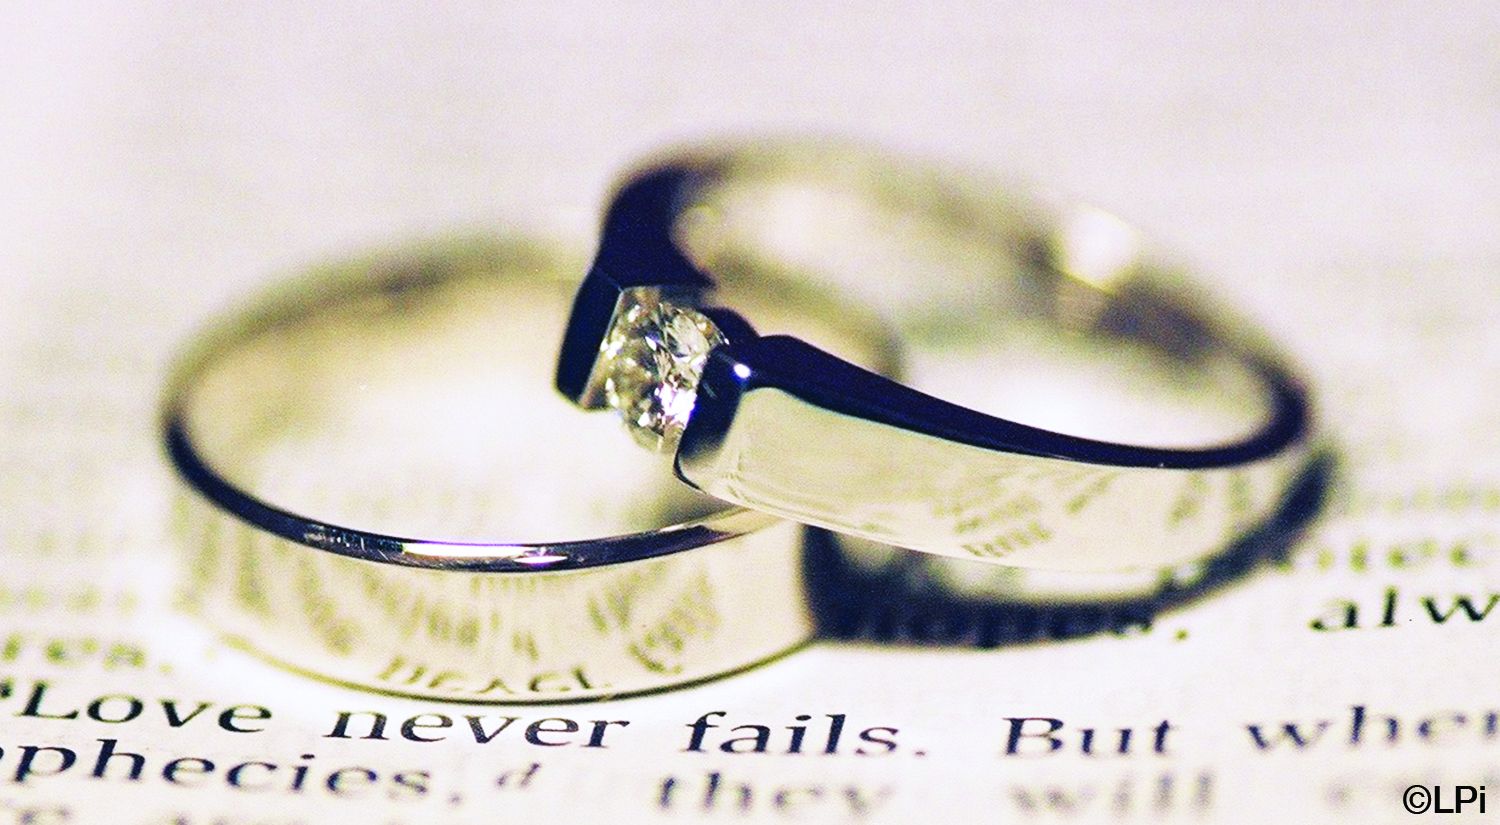 A close up of two wedding rings on top of a book